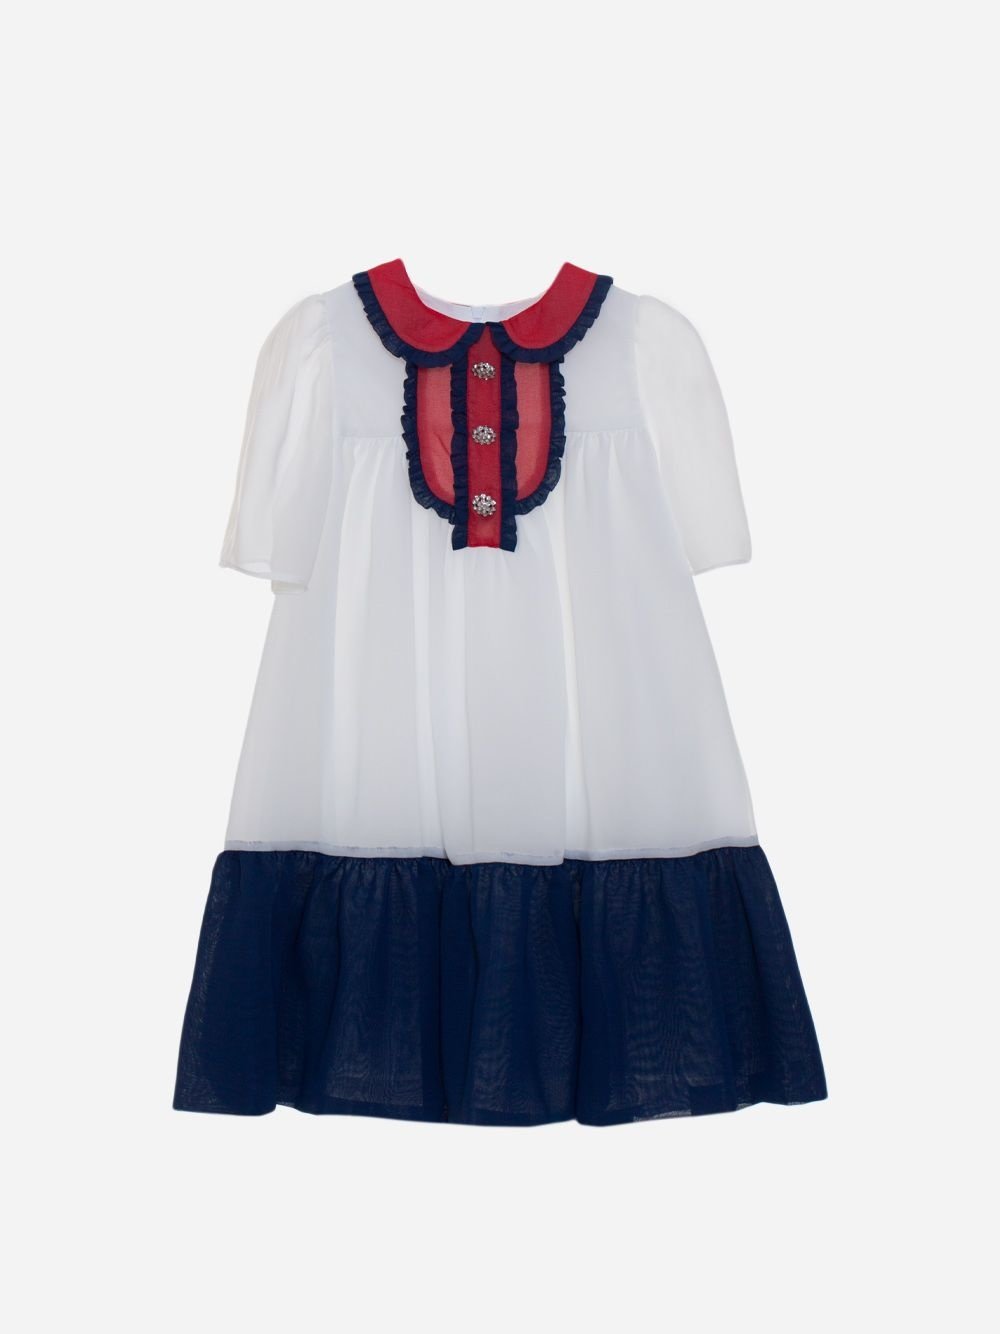 PATACHOU - Girls Party Yatch Dress In White, Red And Marine